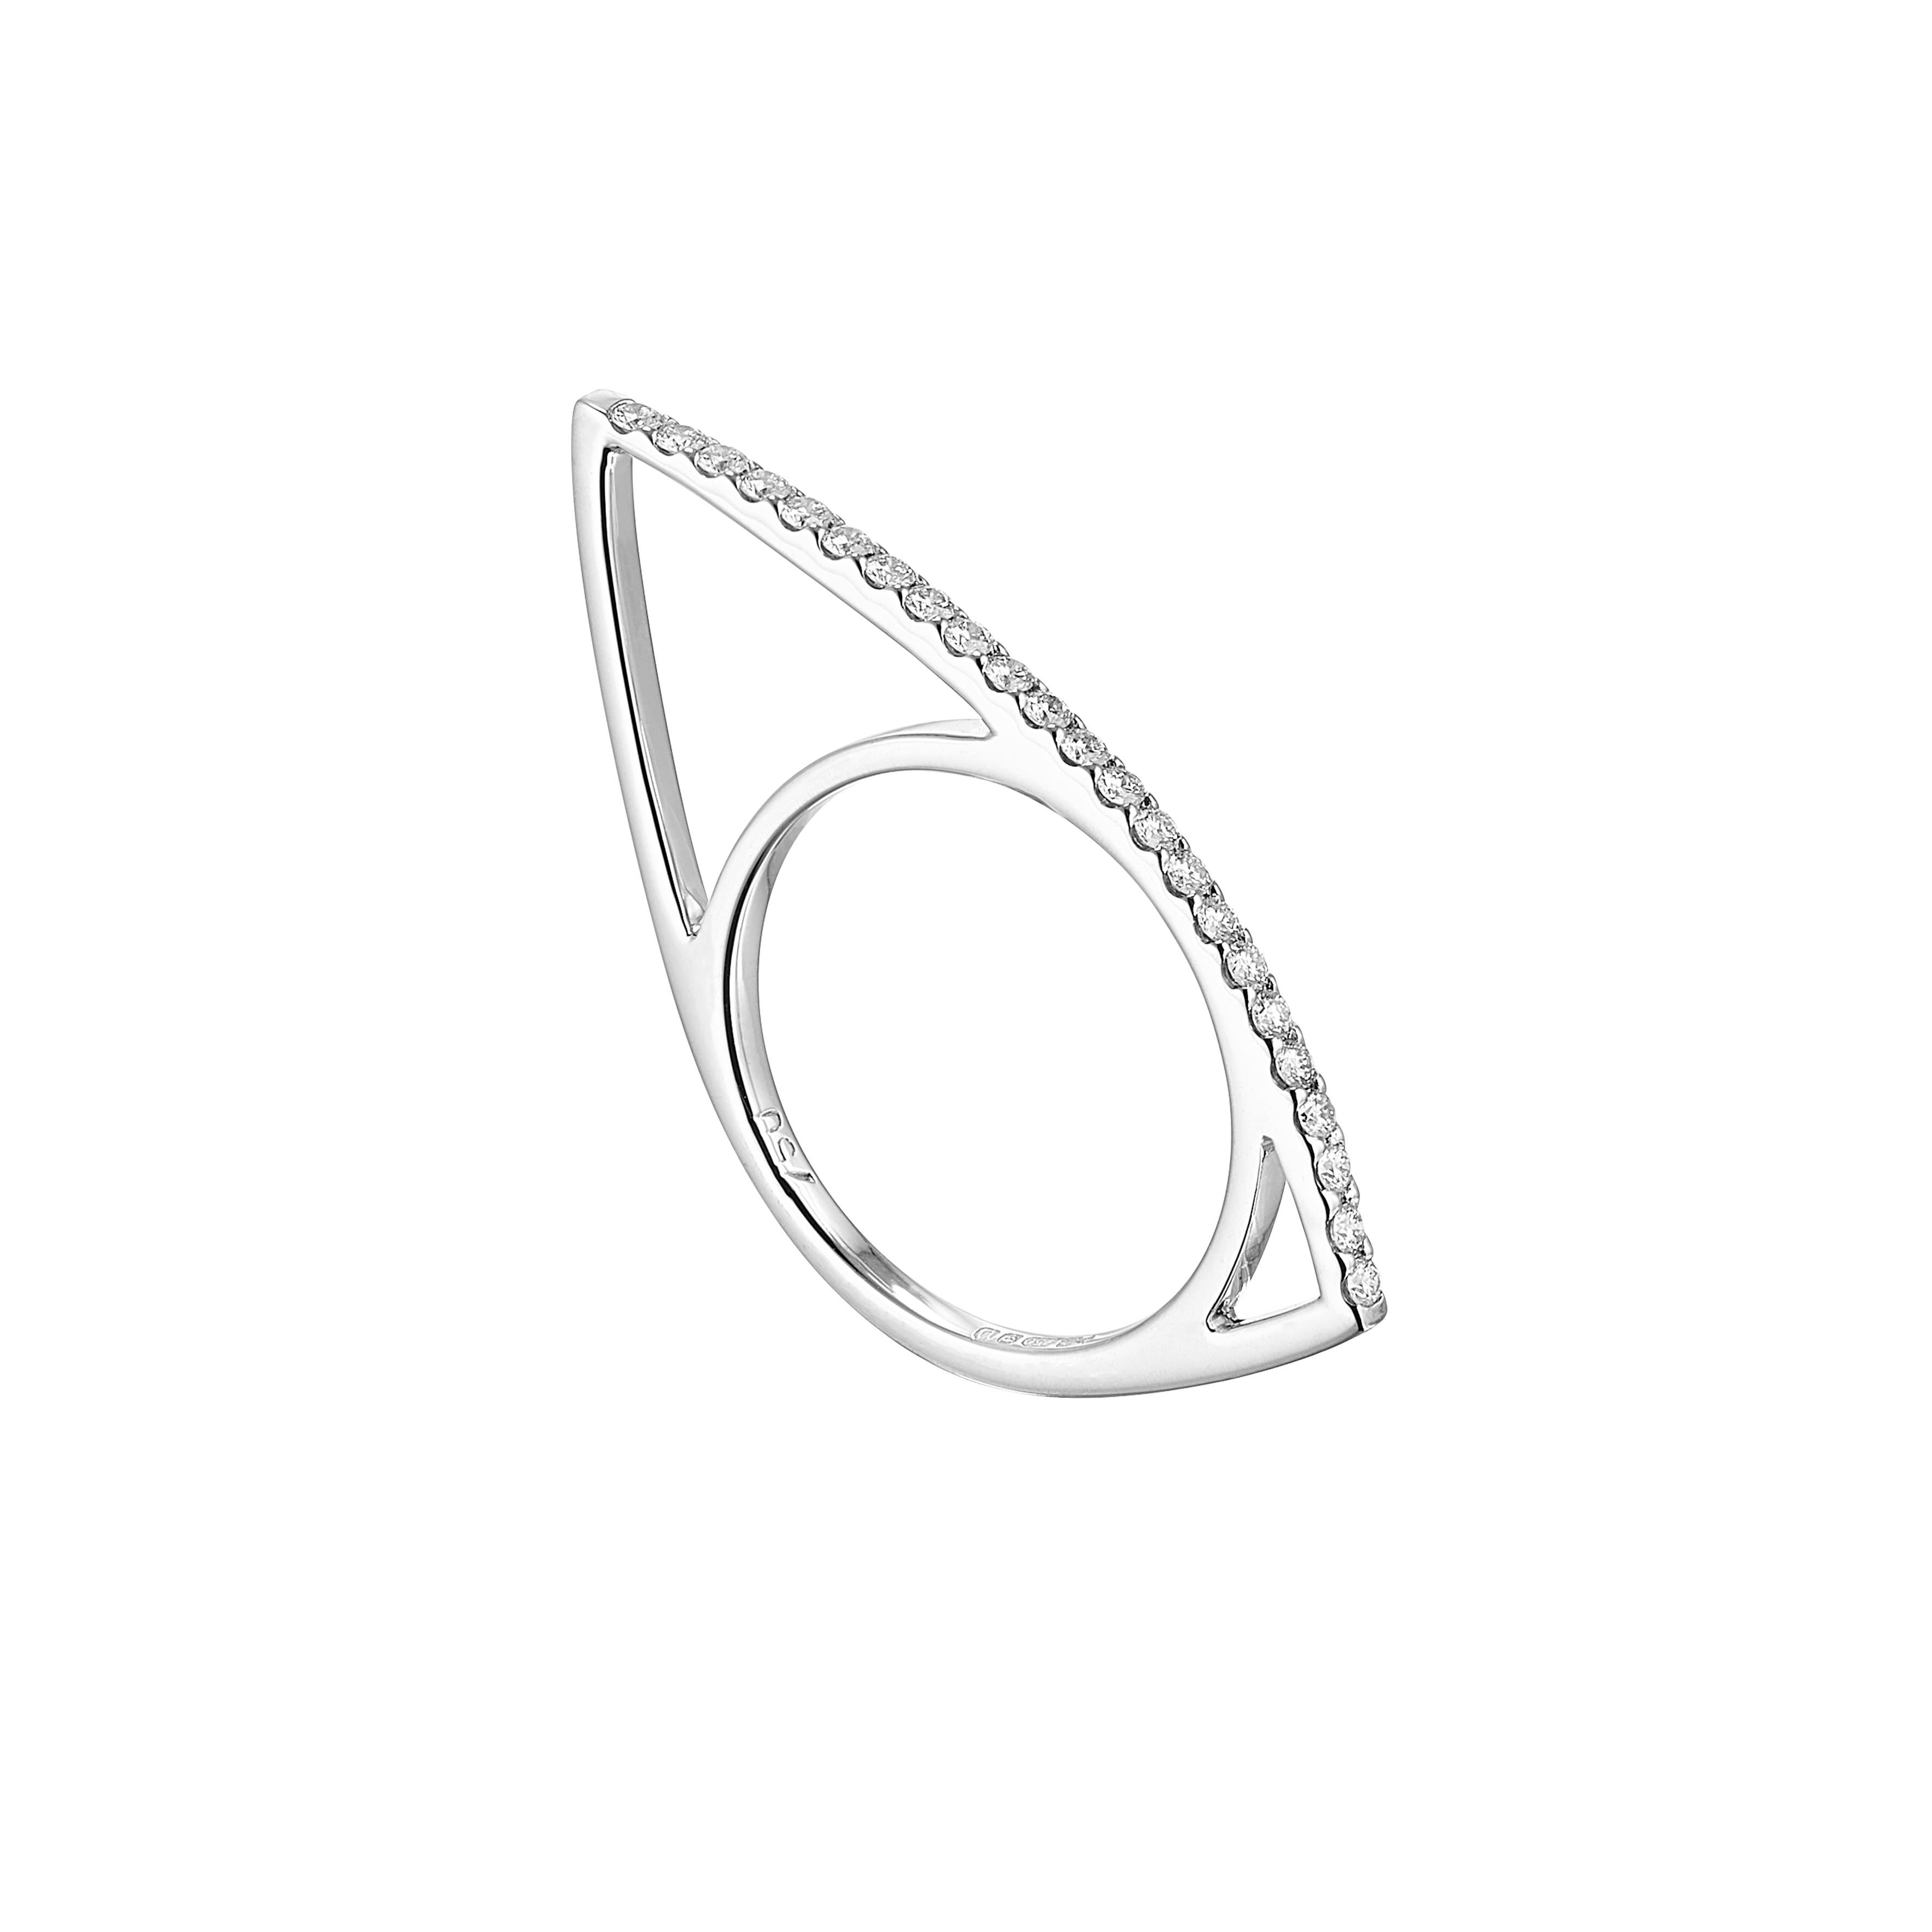 Contemporary Anabela Chan Fine Sustainable Jewelry White Gold Diamond Morpho Ring. 01 For Sale